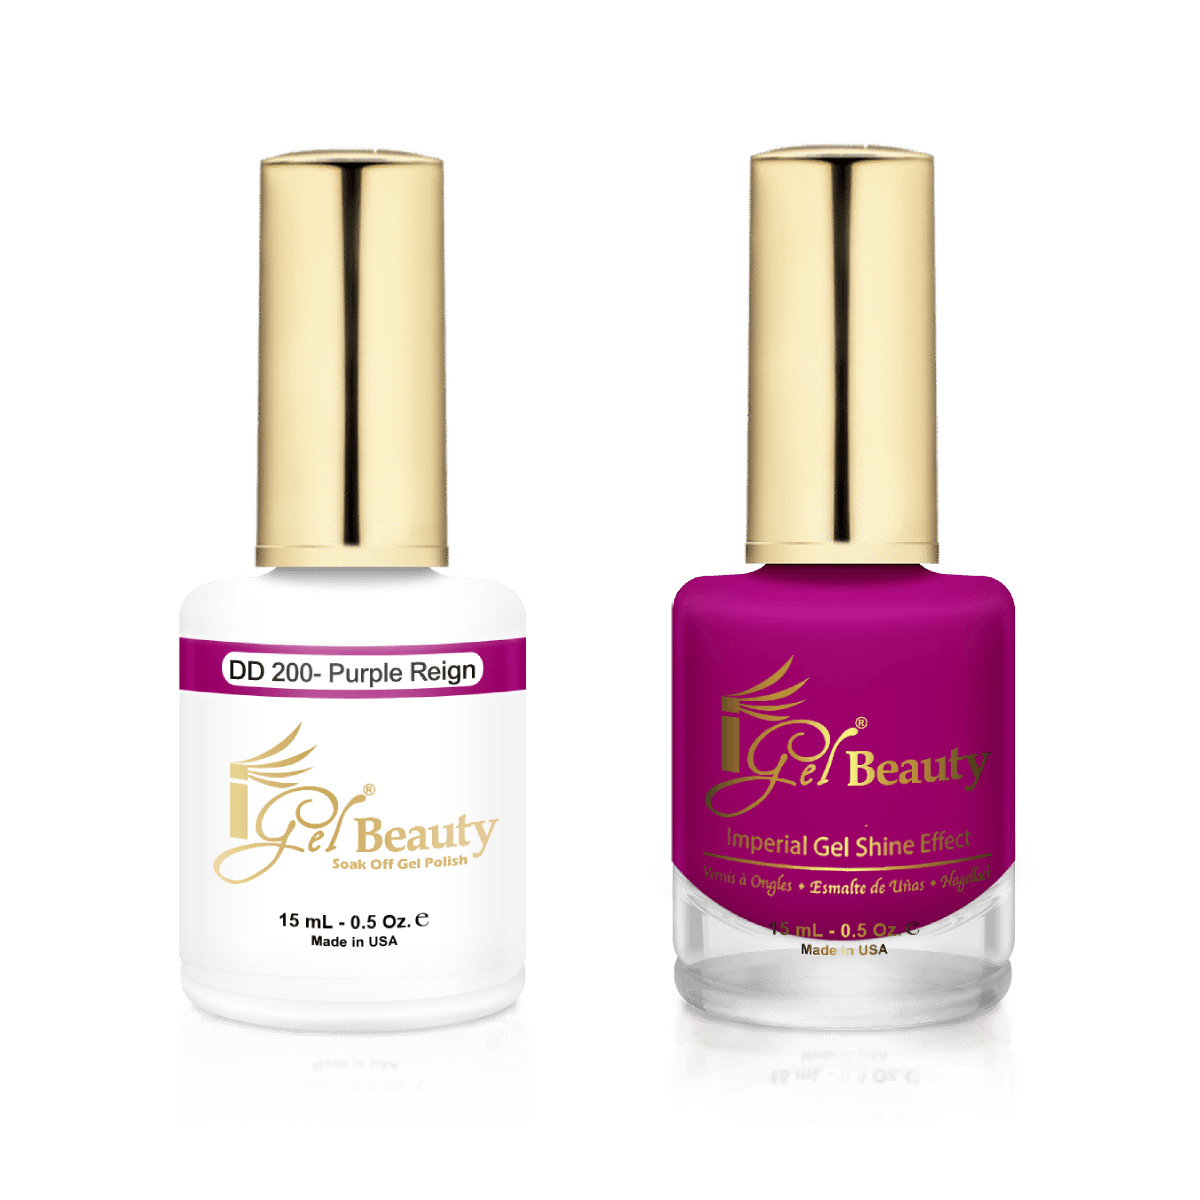 IGel Duo Gel Polish + Matching Nail Lacquer DD 200 PURPLE REIGN